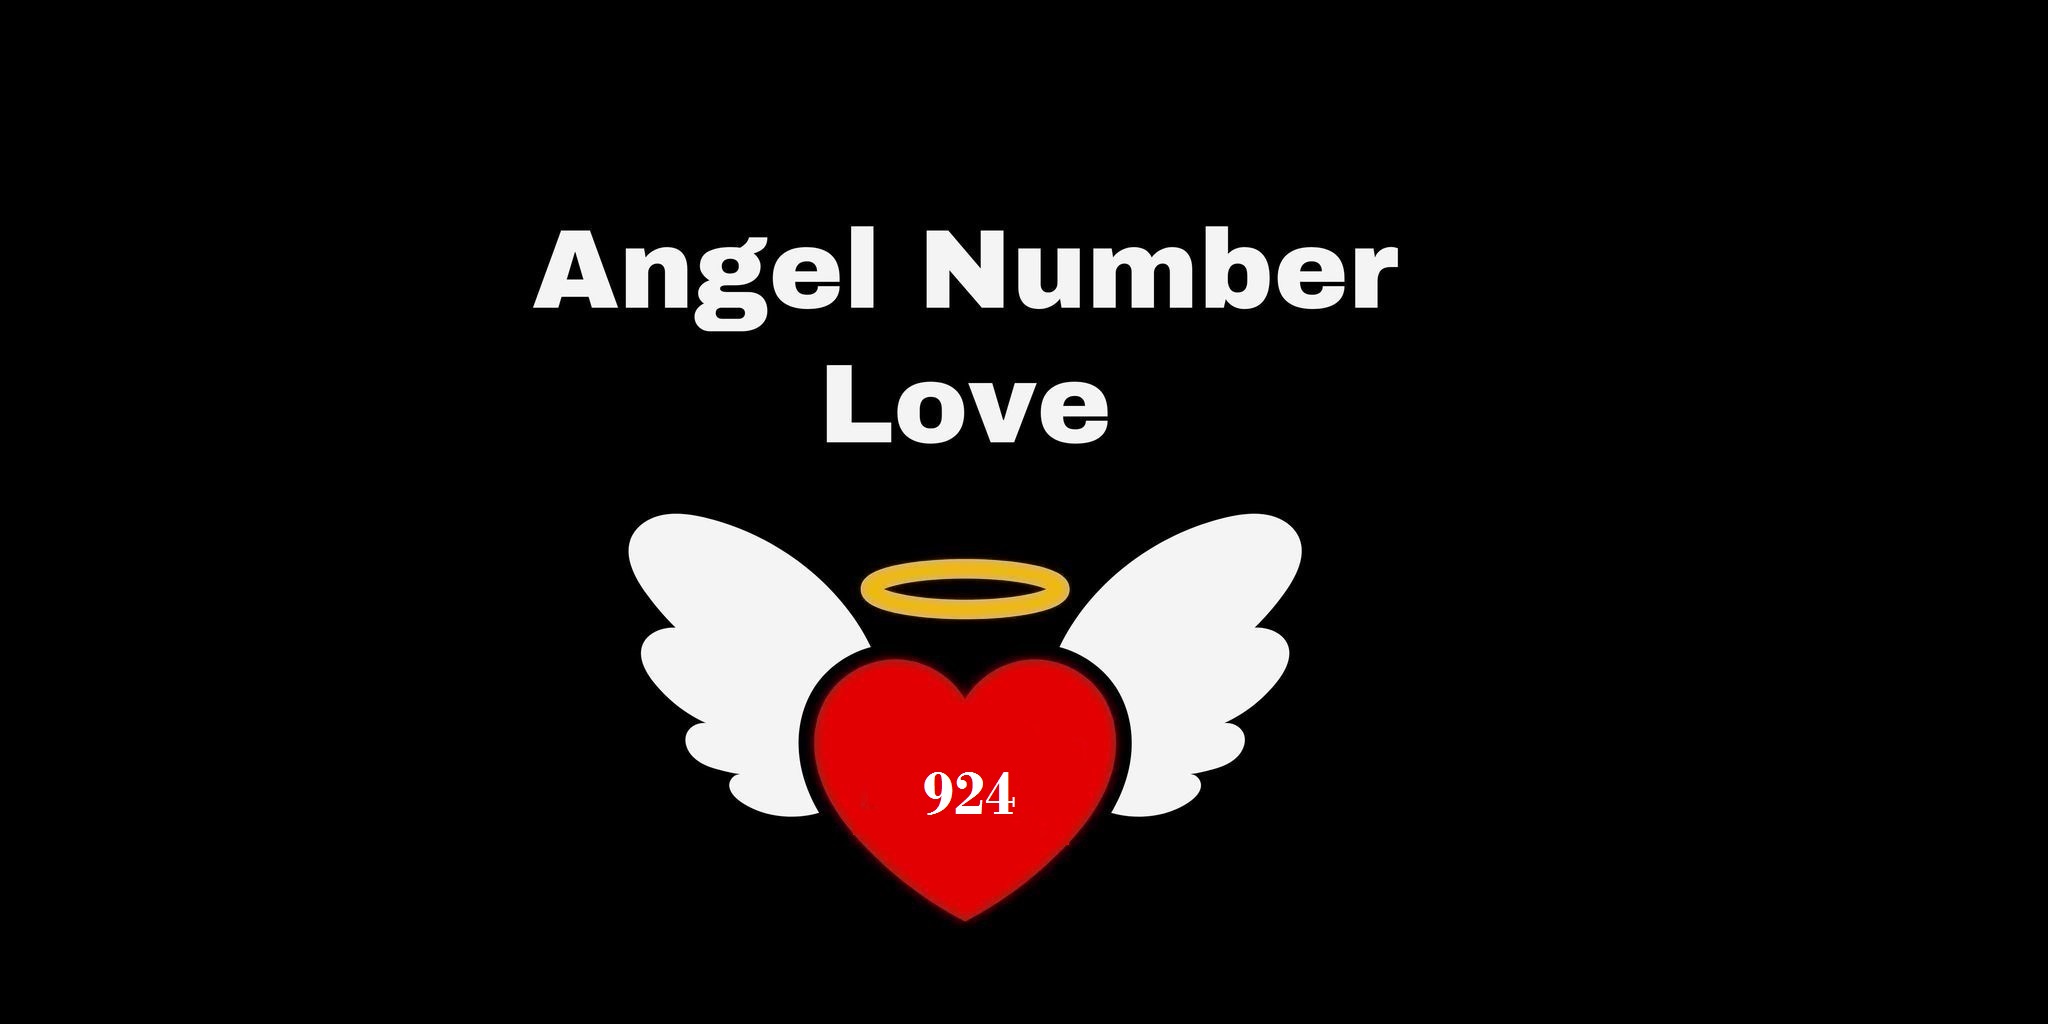 924 Angel Number Meaning In Love